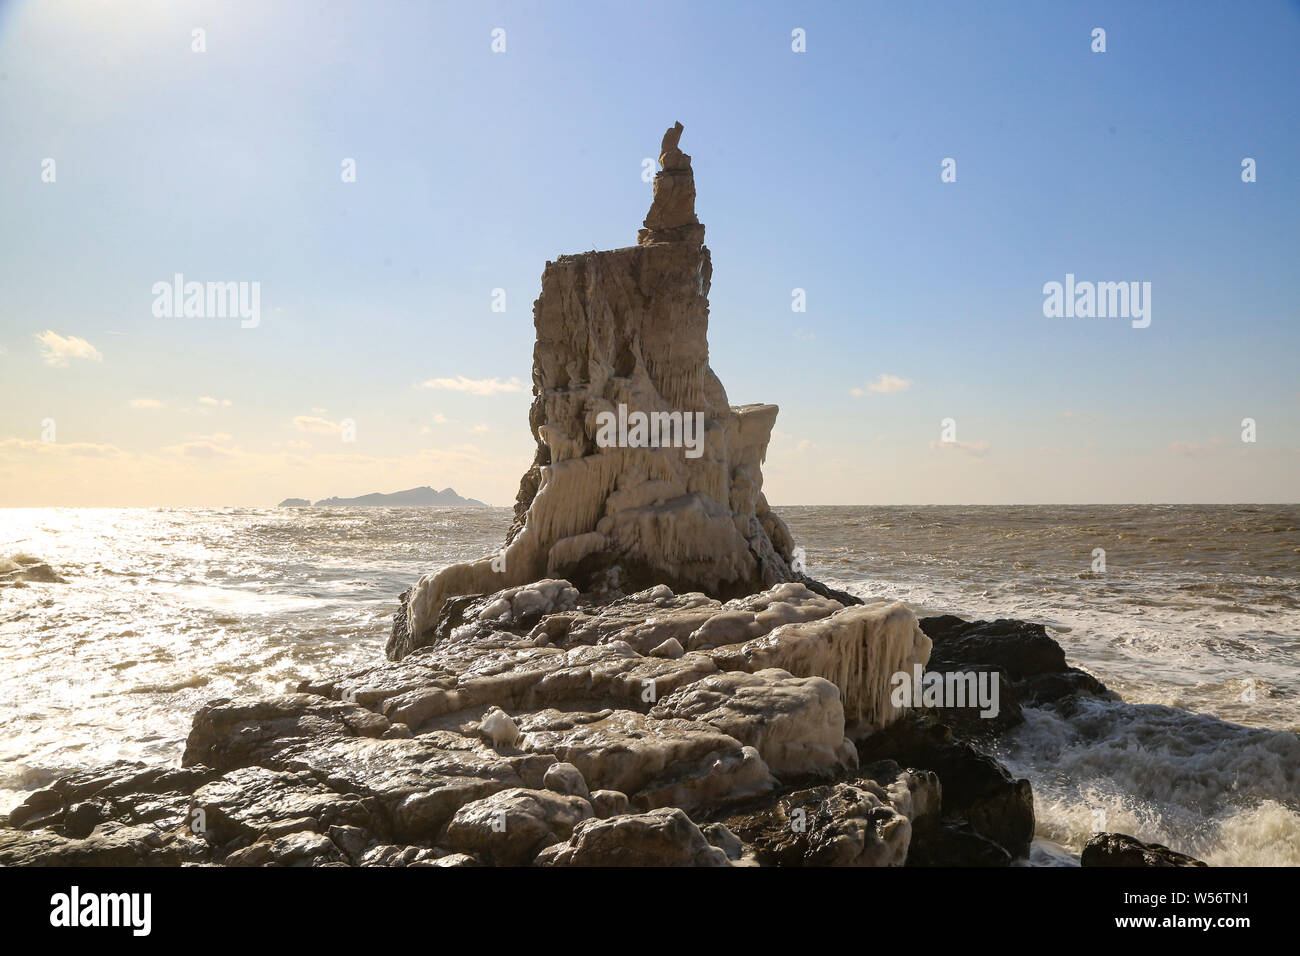 Landscape of the thick sea ice on the frozen sea surface at Bohai Sea in Dalian city, northeast China's Liaoning province, 7 February 2019. Stock Photo